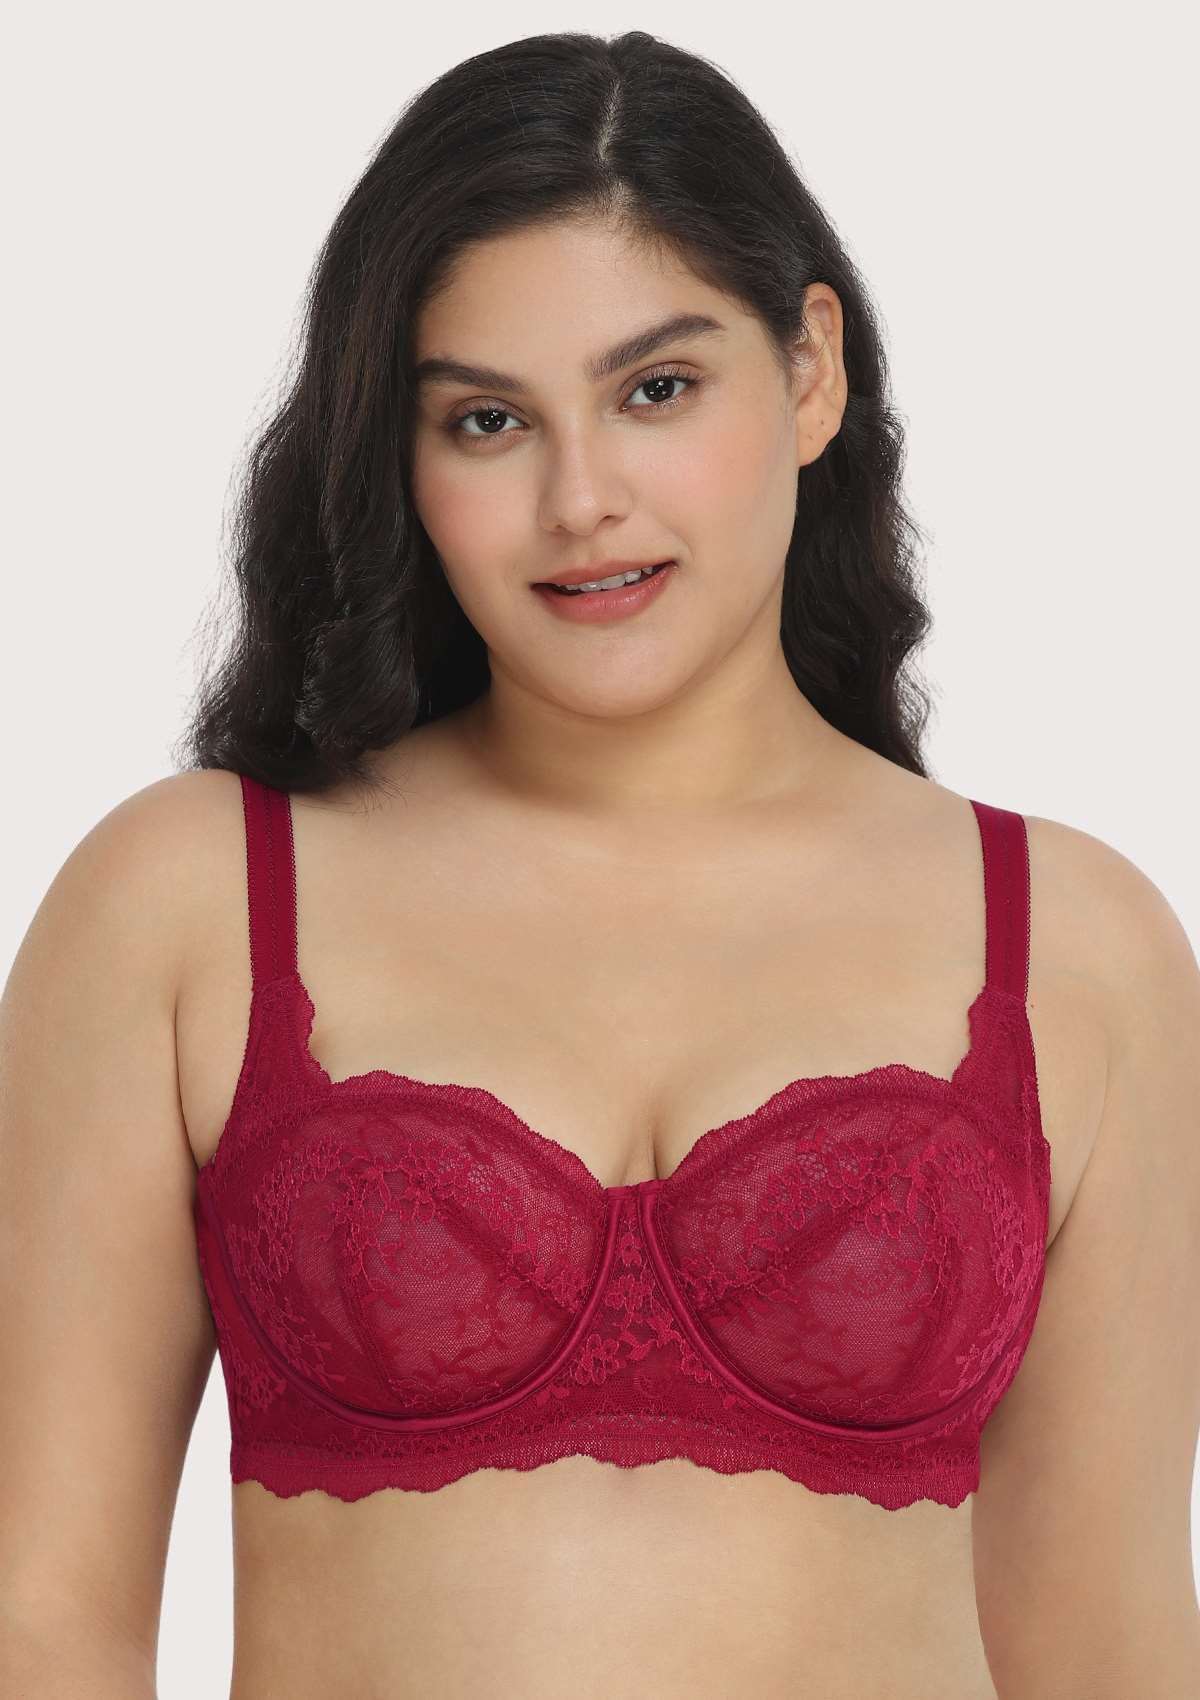 HSIA Floral Lace Unlined Bridal Balconette Bra Set - Supportive Classic - Burgundy / 36 / DD/E